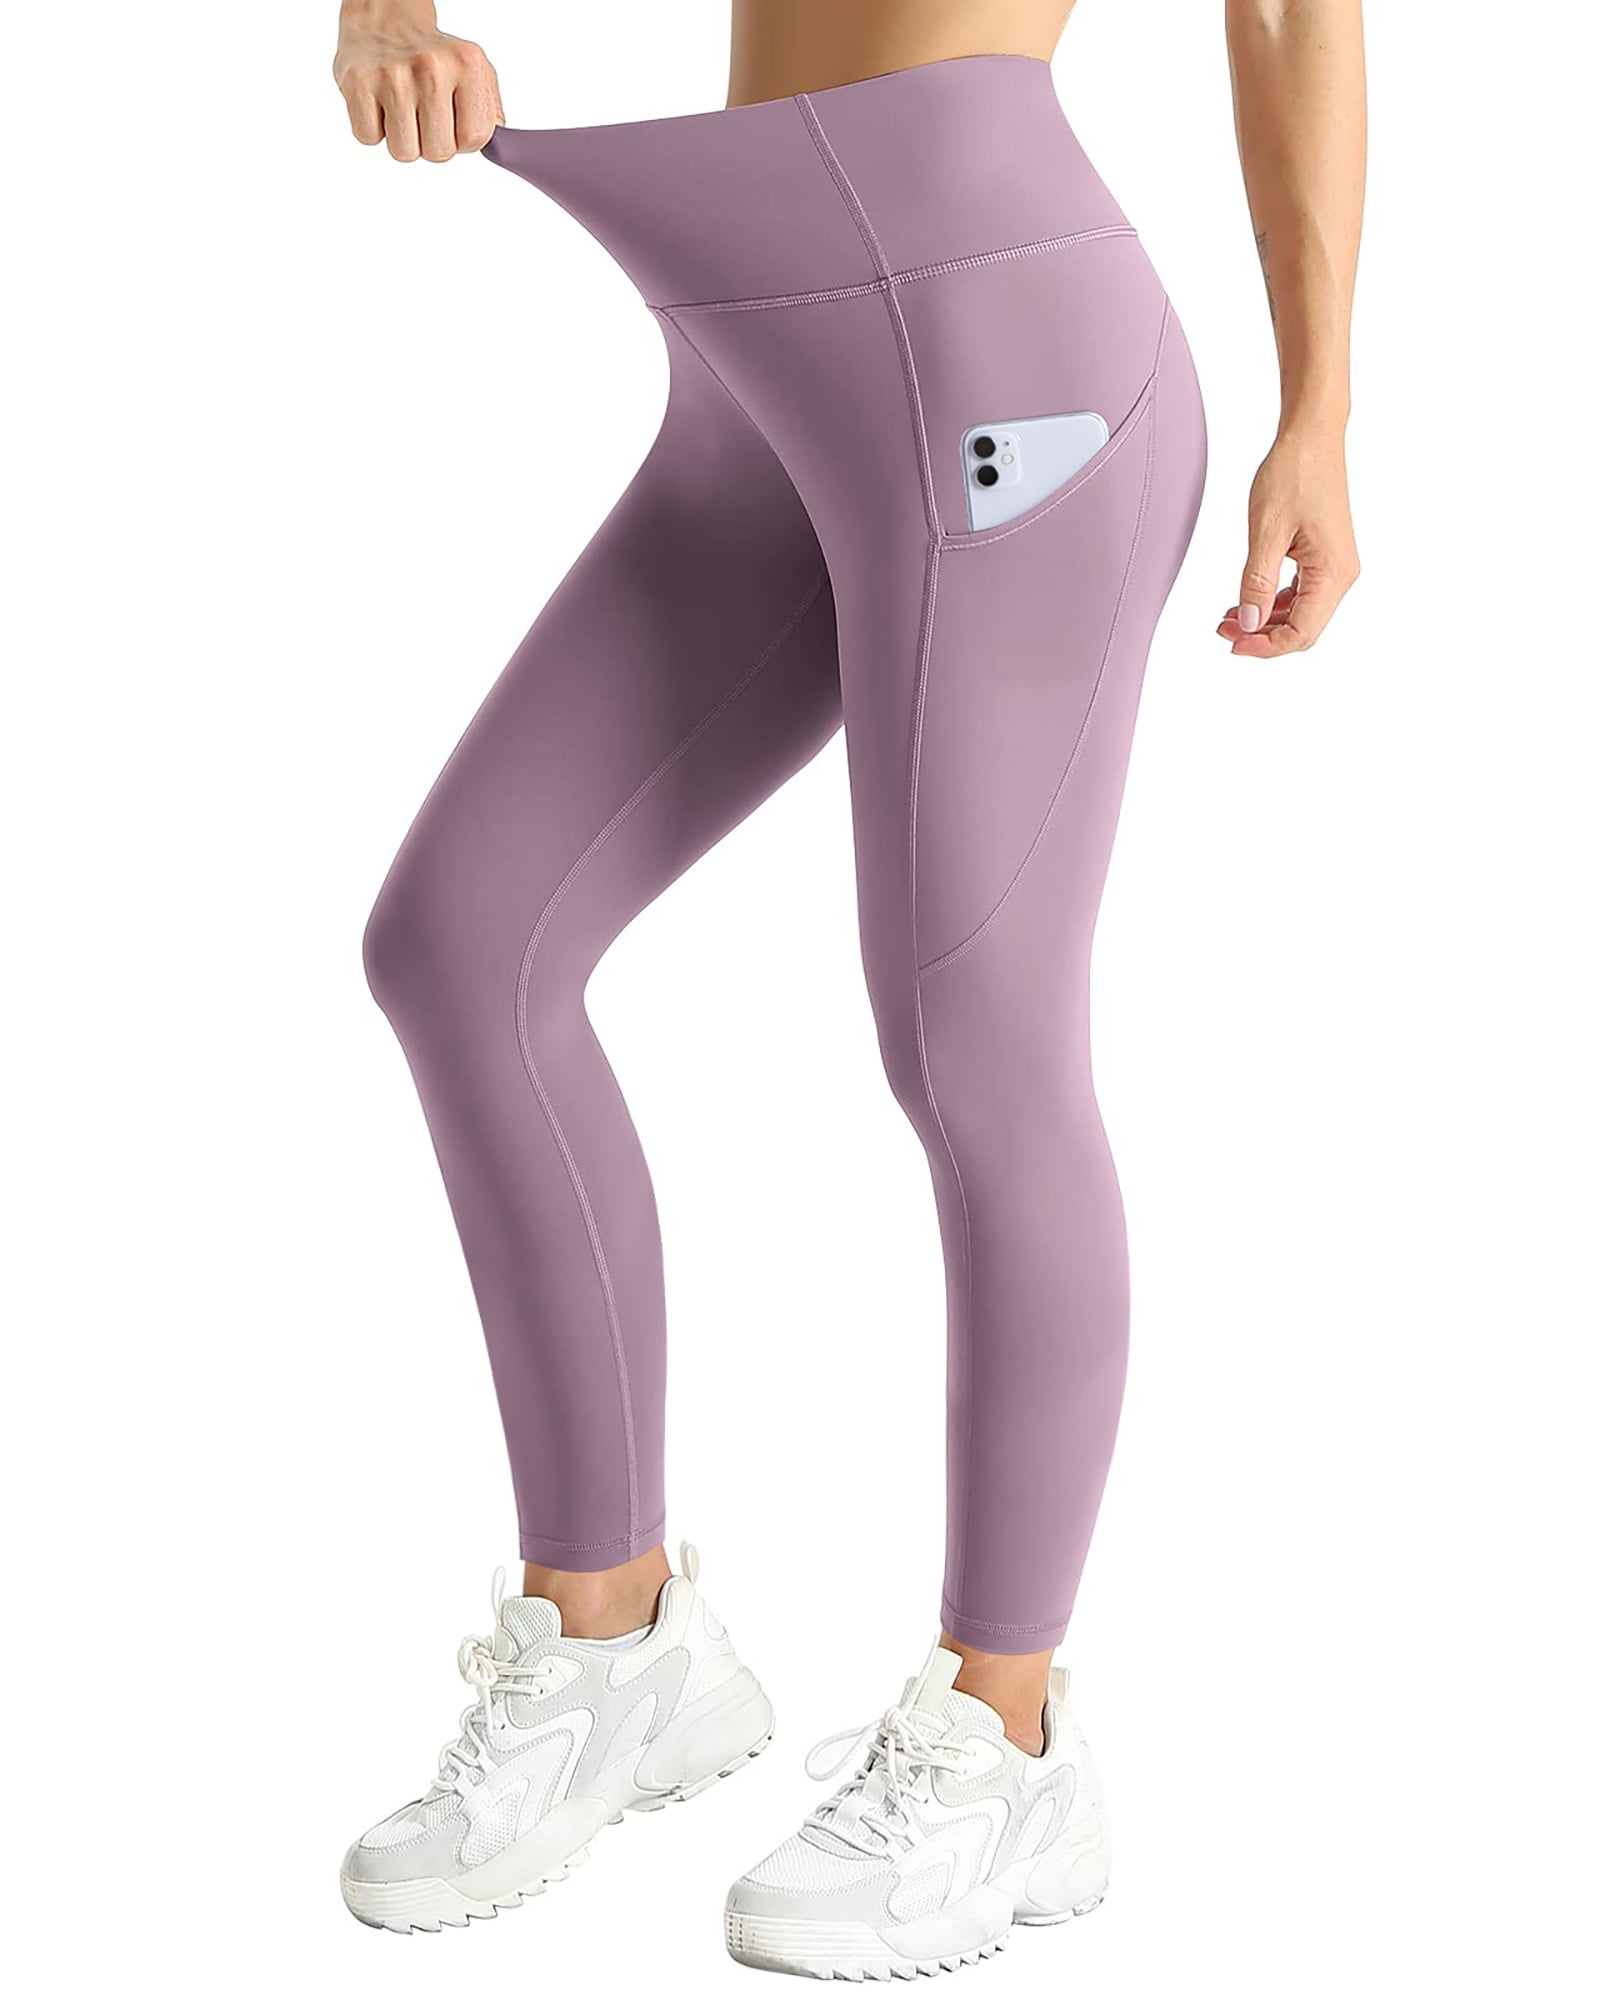 UUE 25Inseam Grey Leggings with Pockets for women, Tummy control and High  waisted leggings,Yoga high waisted leggings for Fitness